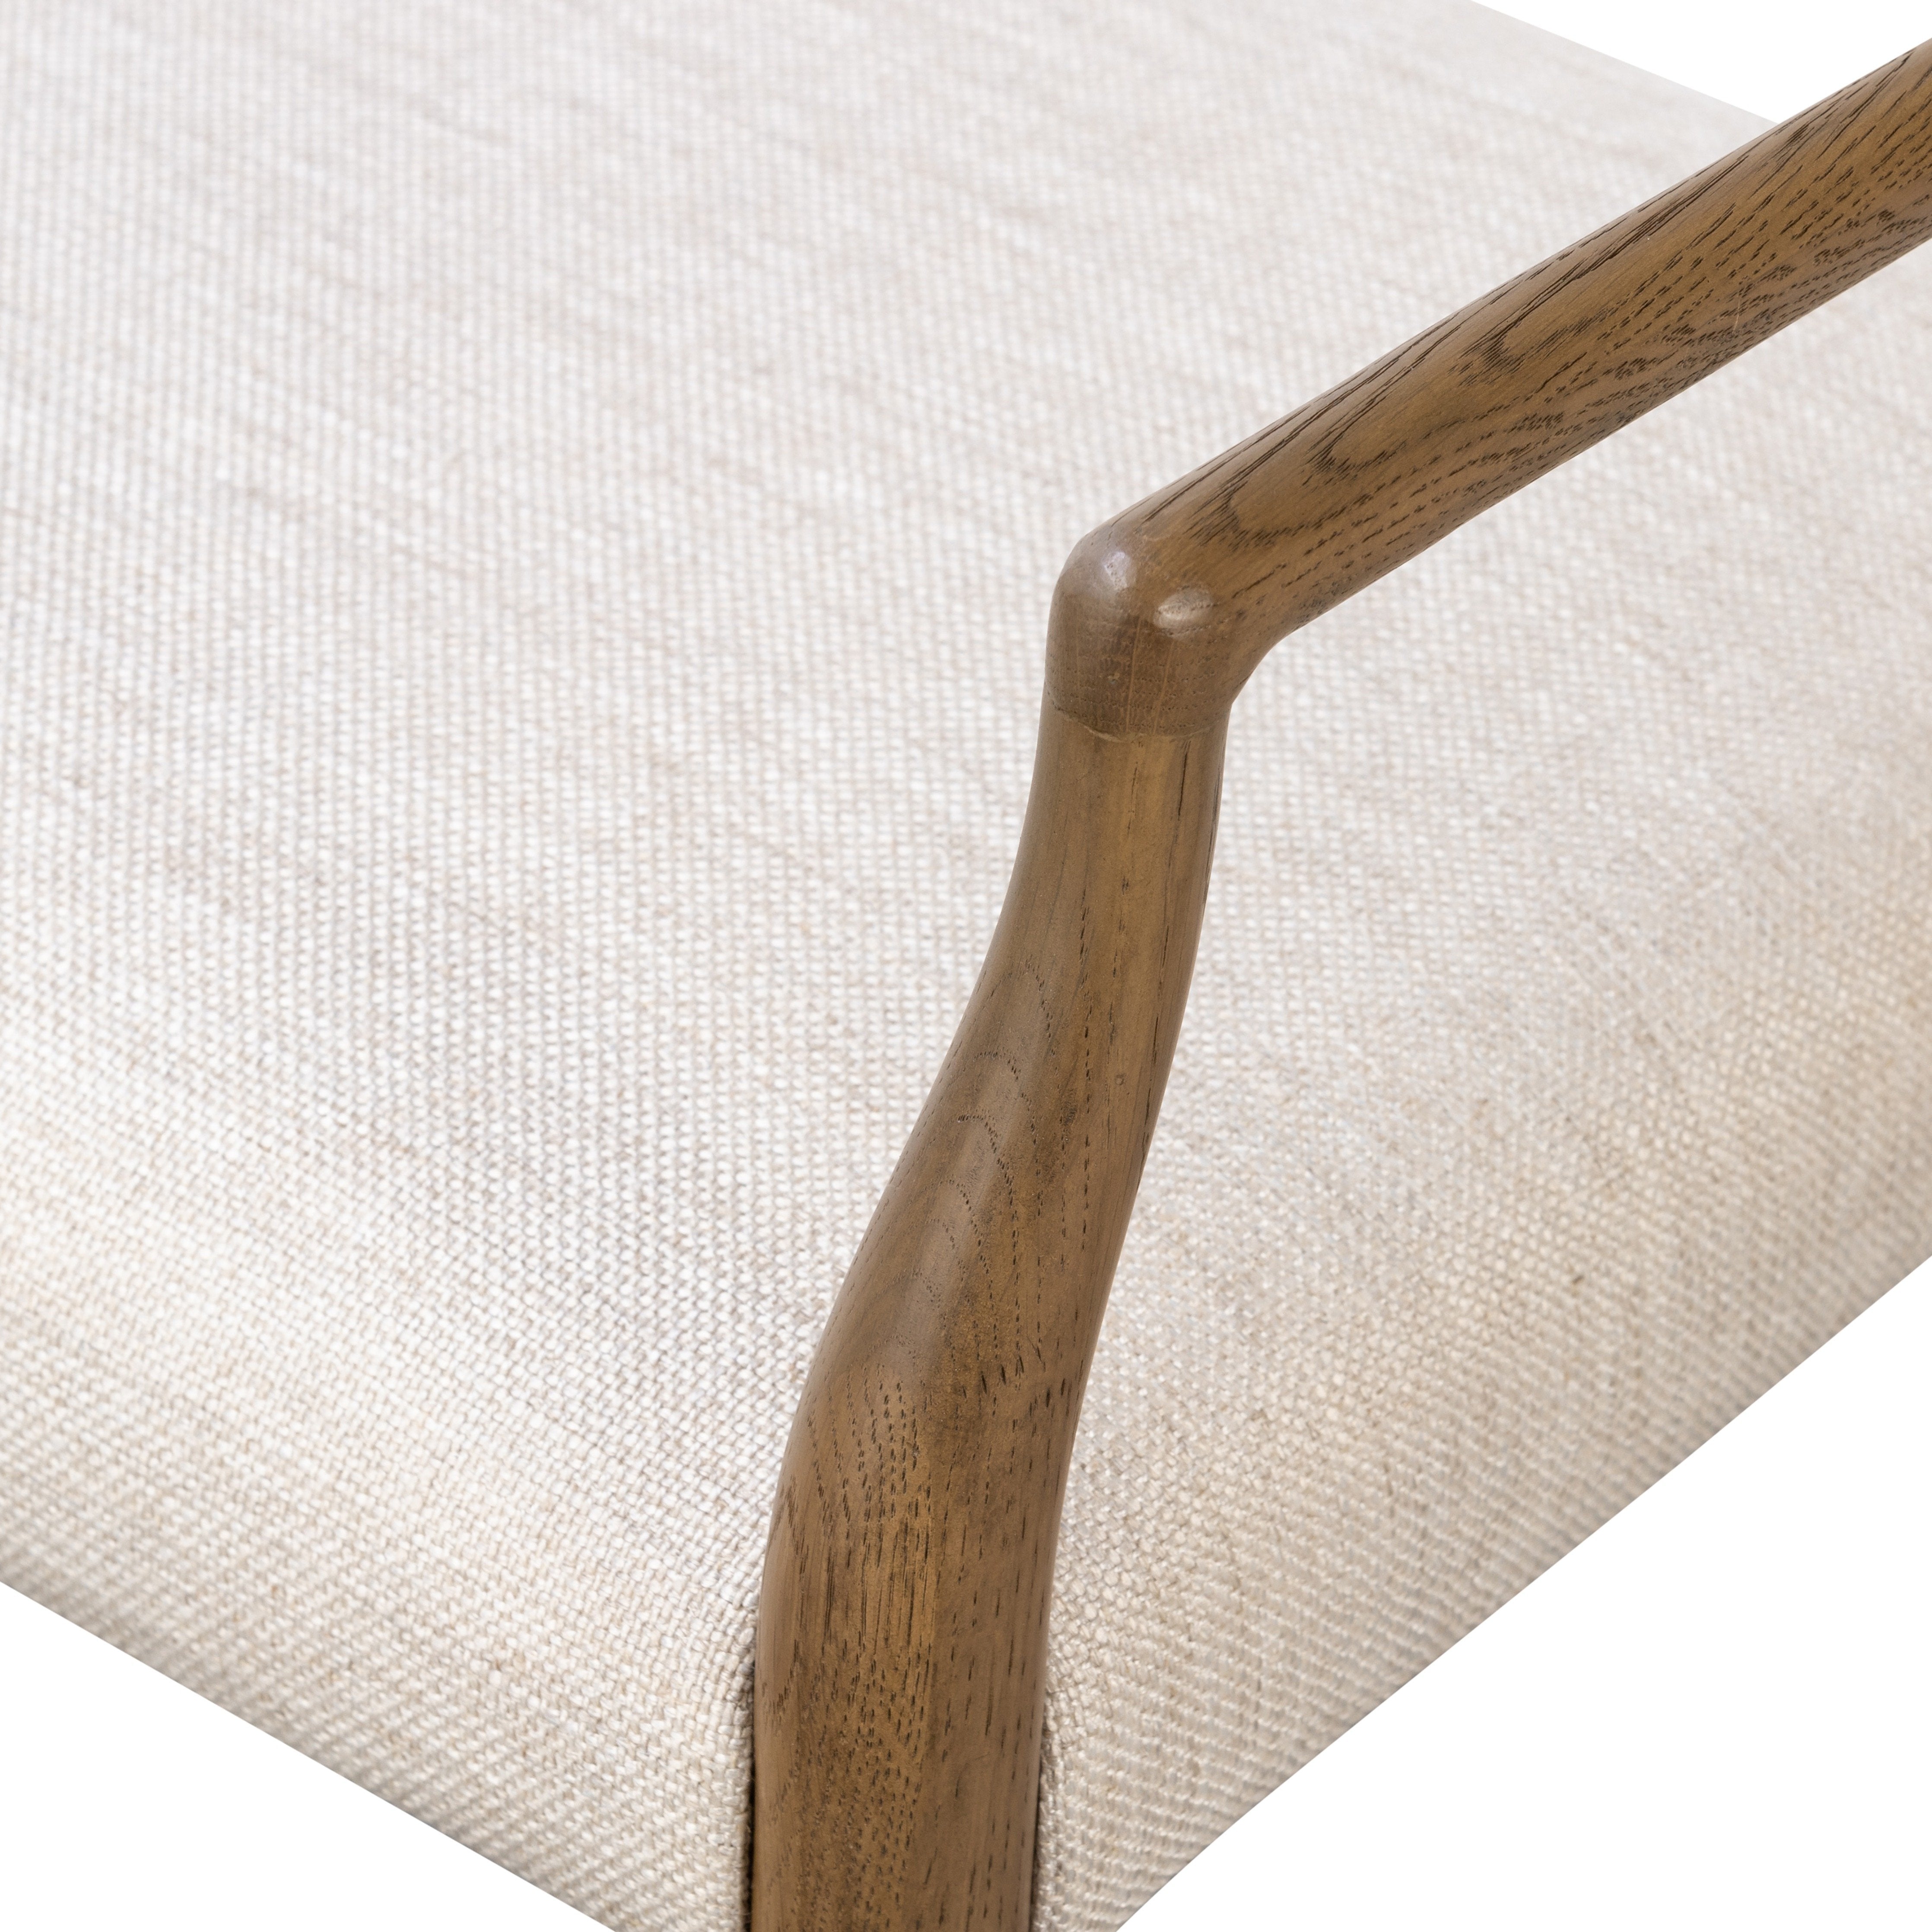 The classic ladderback chair, reimagined. Smoked solid oak frames a squared cotton- and linen-blend seat, for a textural feel and comfortable sit.Collection: Bolton Amethyst Home provides interior design, new home construction design consulting, vintage area rugs, and lighting in the Tampa metro area.